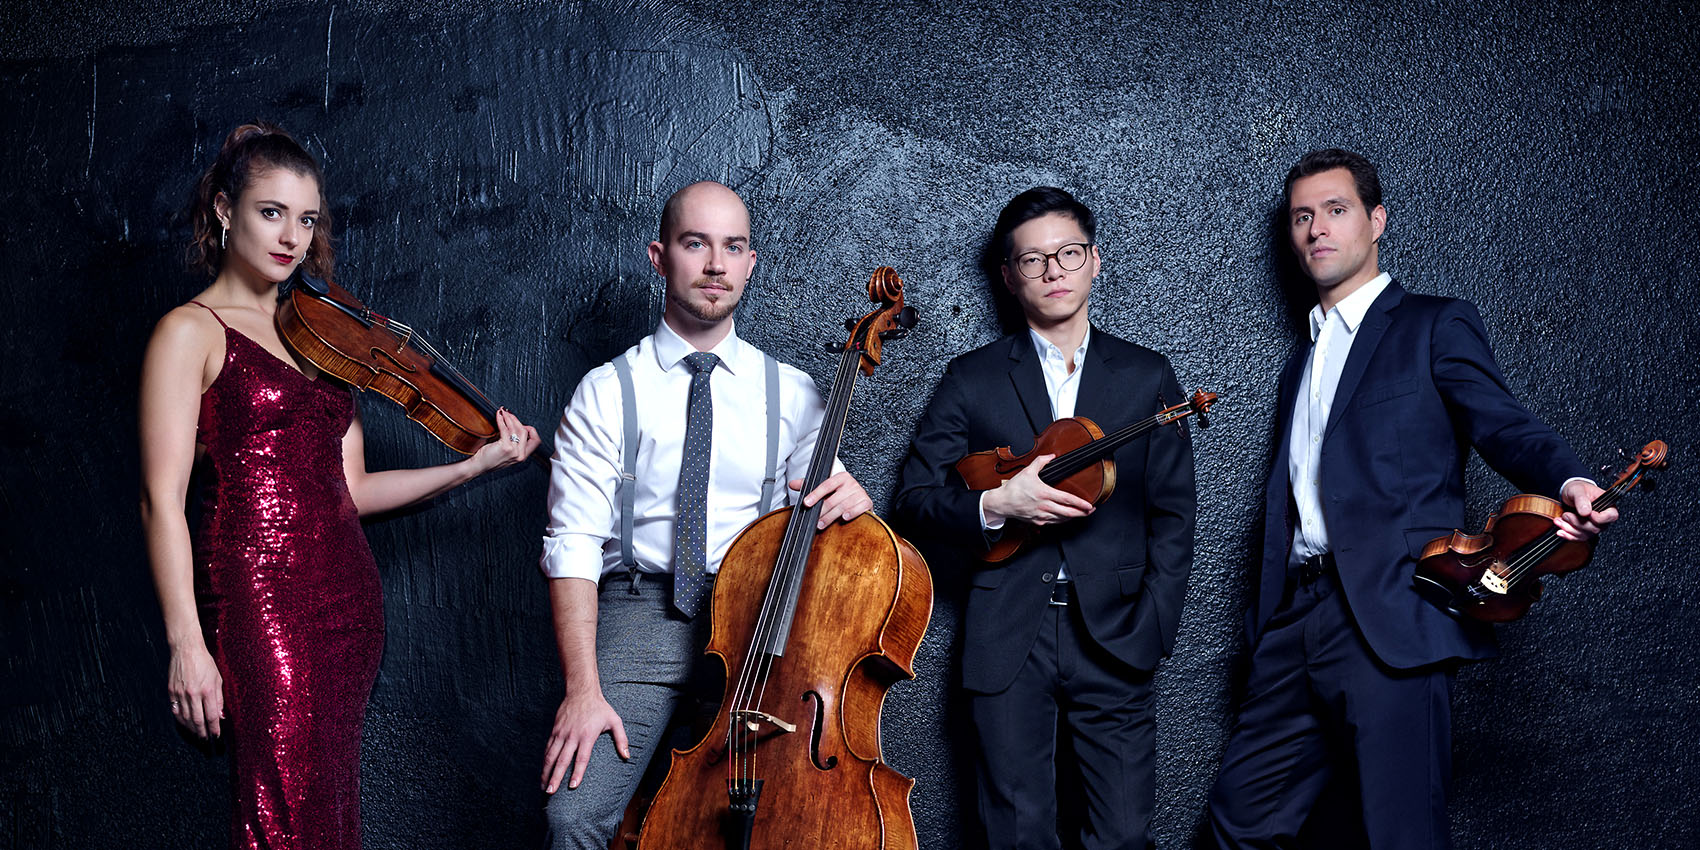 Four musicians pose with their string instruments against a dark background